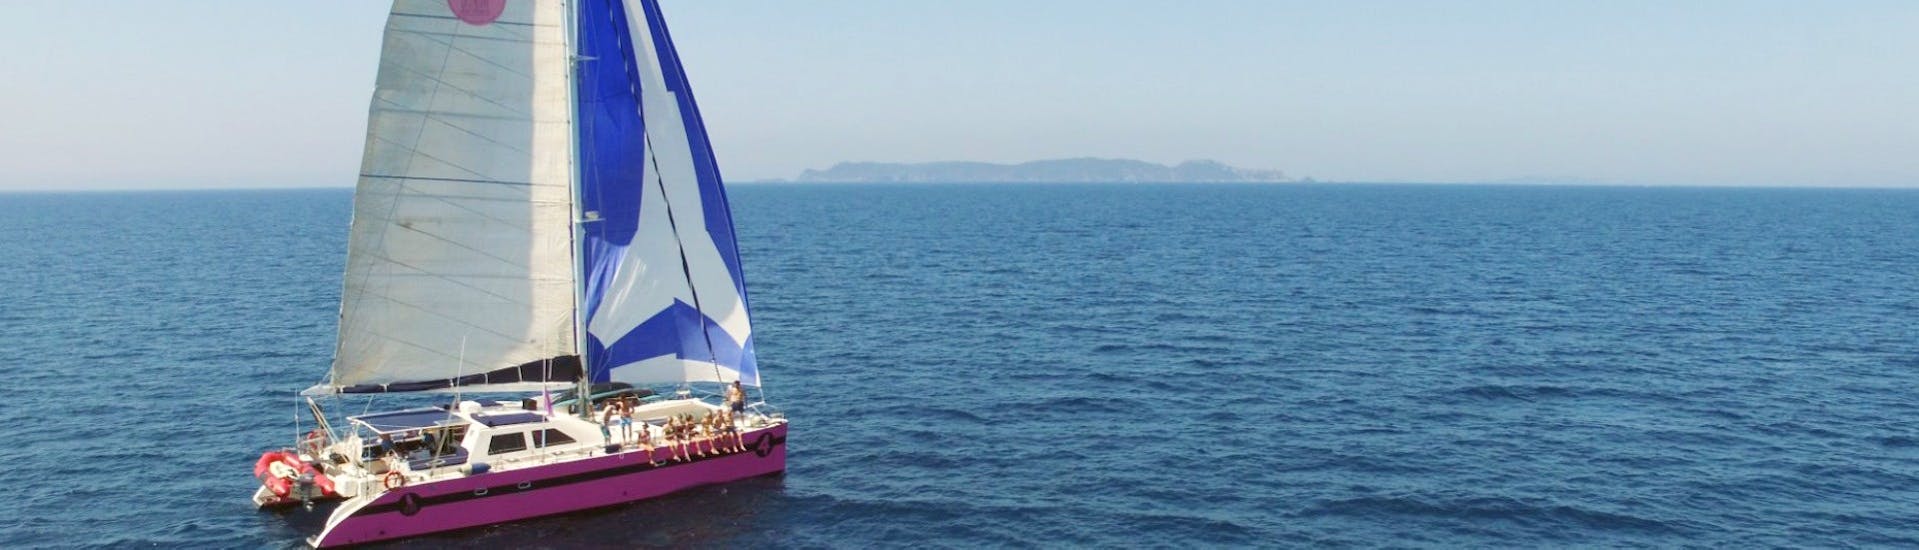 Friends doing a Catamaran Trip in the Bay of Quiberon and to the Island of Houat with Caseneuve Maxi Catamaran.